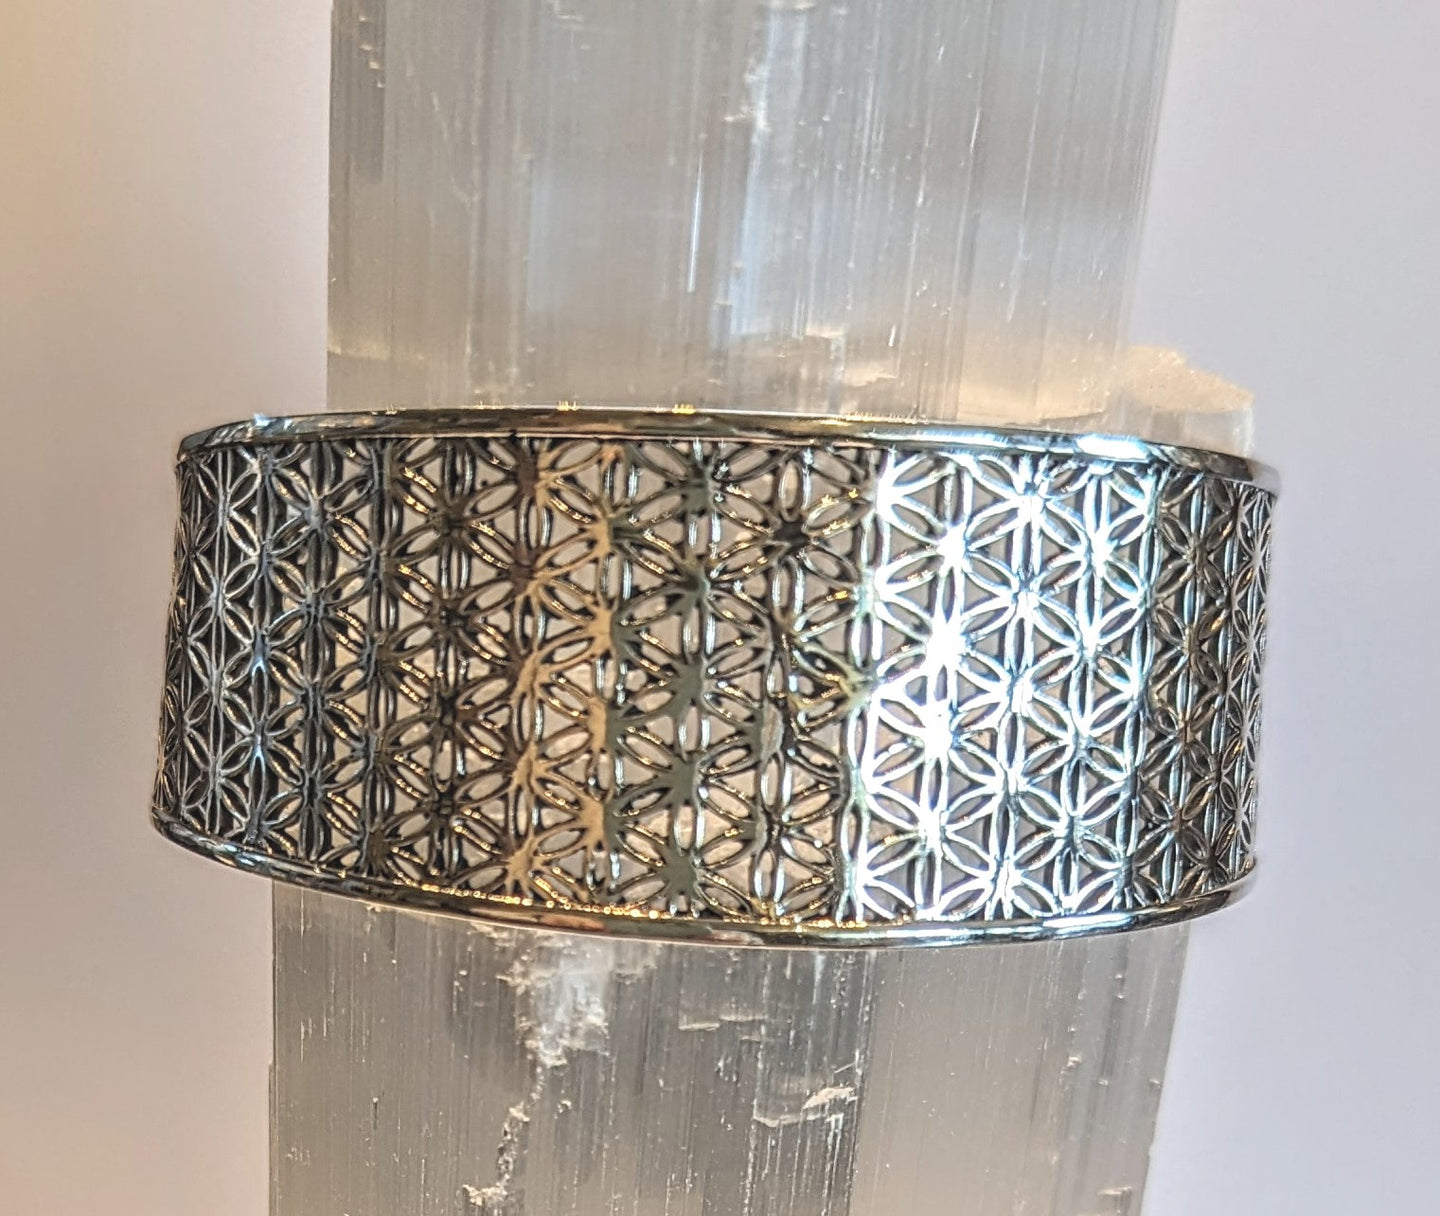 Flower of life design cuff bracelet in sterling silver with rhodium finish.